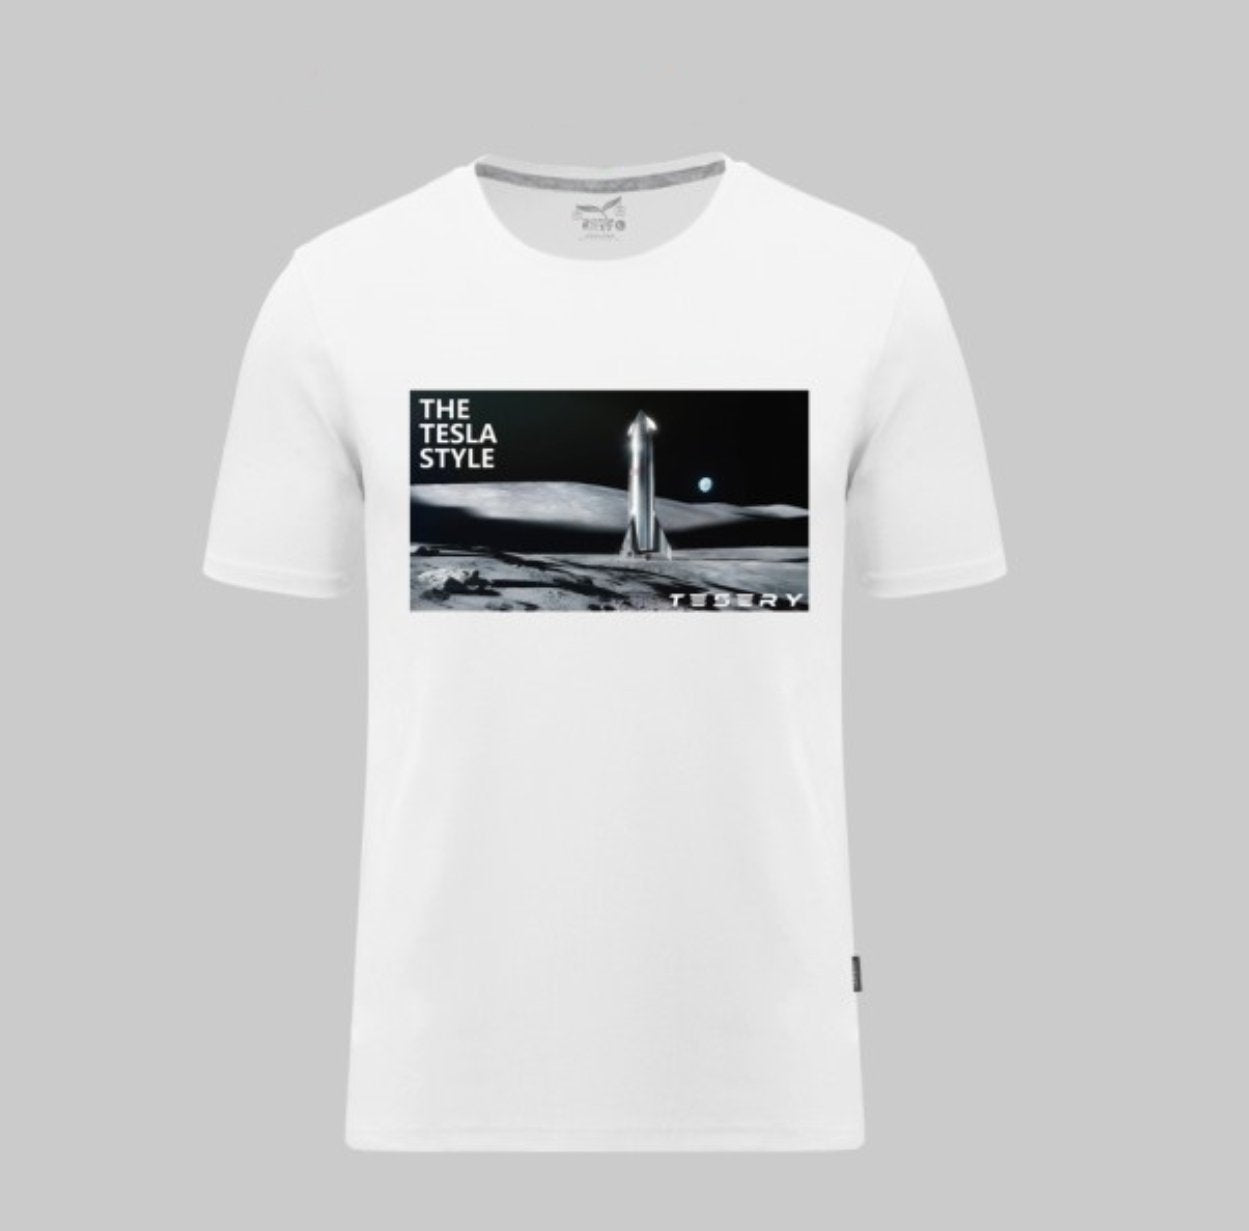 T-shirt form Tesery -SpaceX Rockets (Recommended to take one size up) - Tesery Official Store